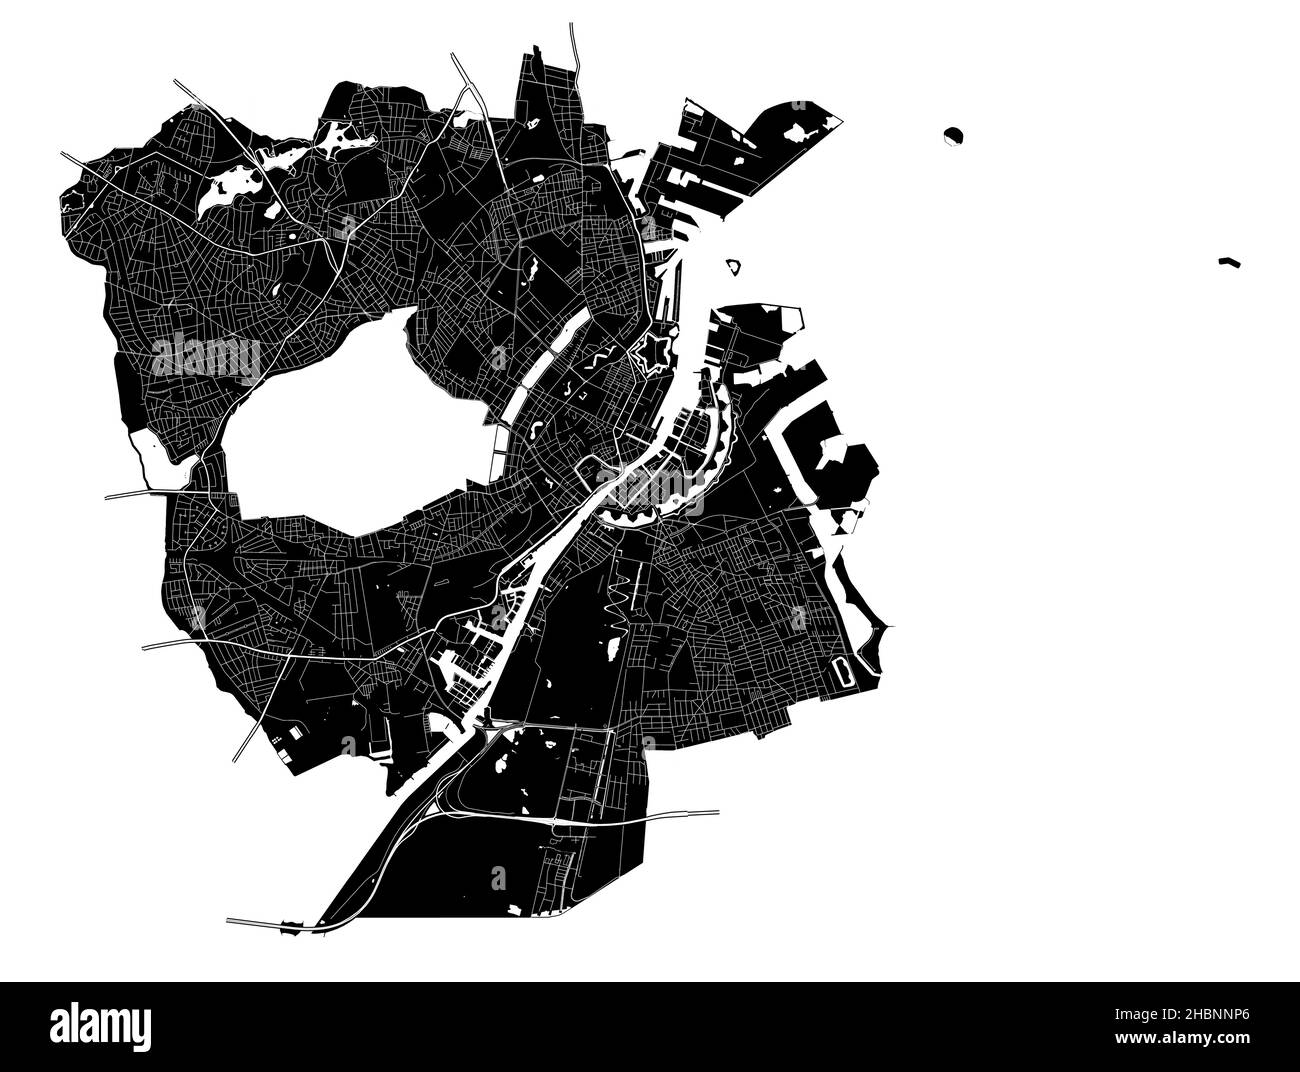 Kopenhagen, Denmark, high resolution vector map with city boundaries, and editable paths. The city map was drawn with white areas and lines for main r Stock Vector